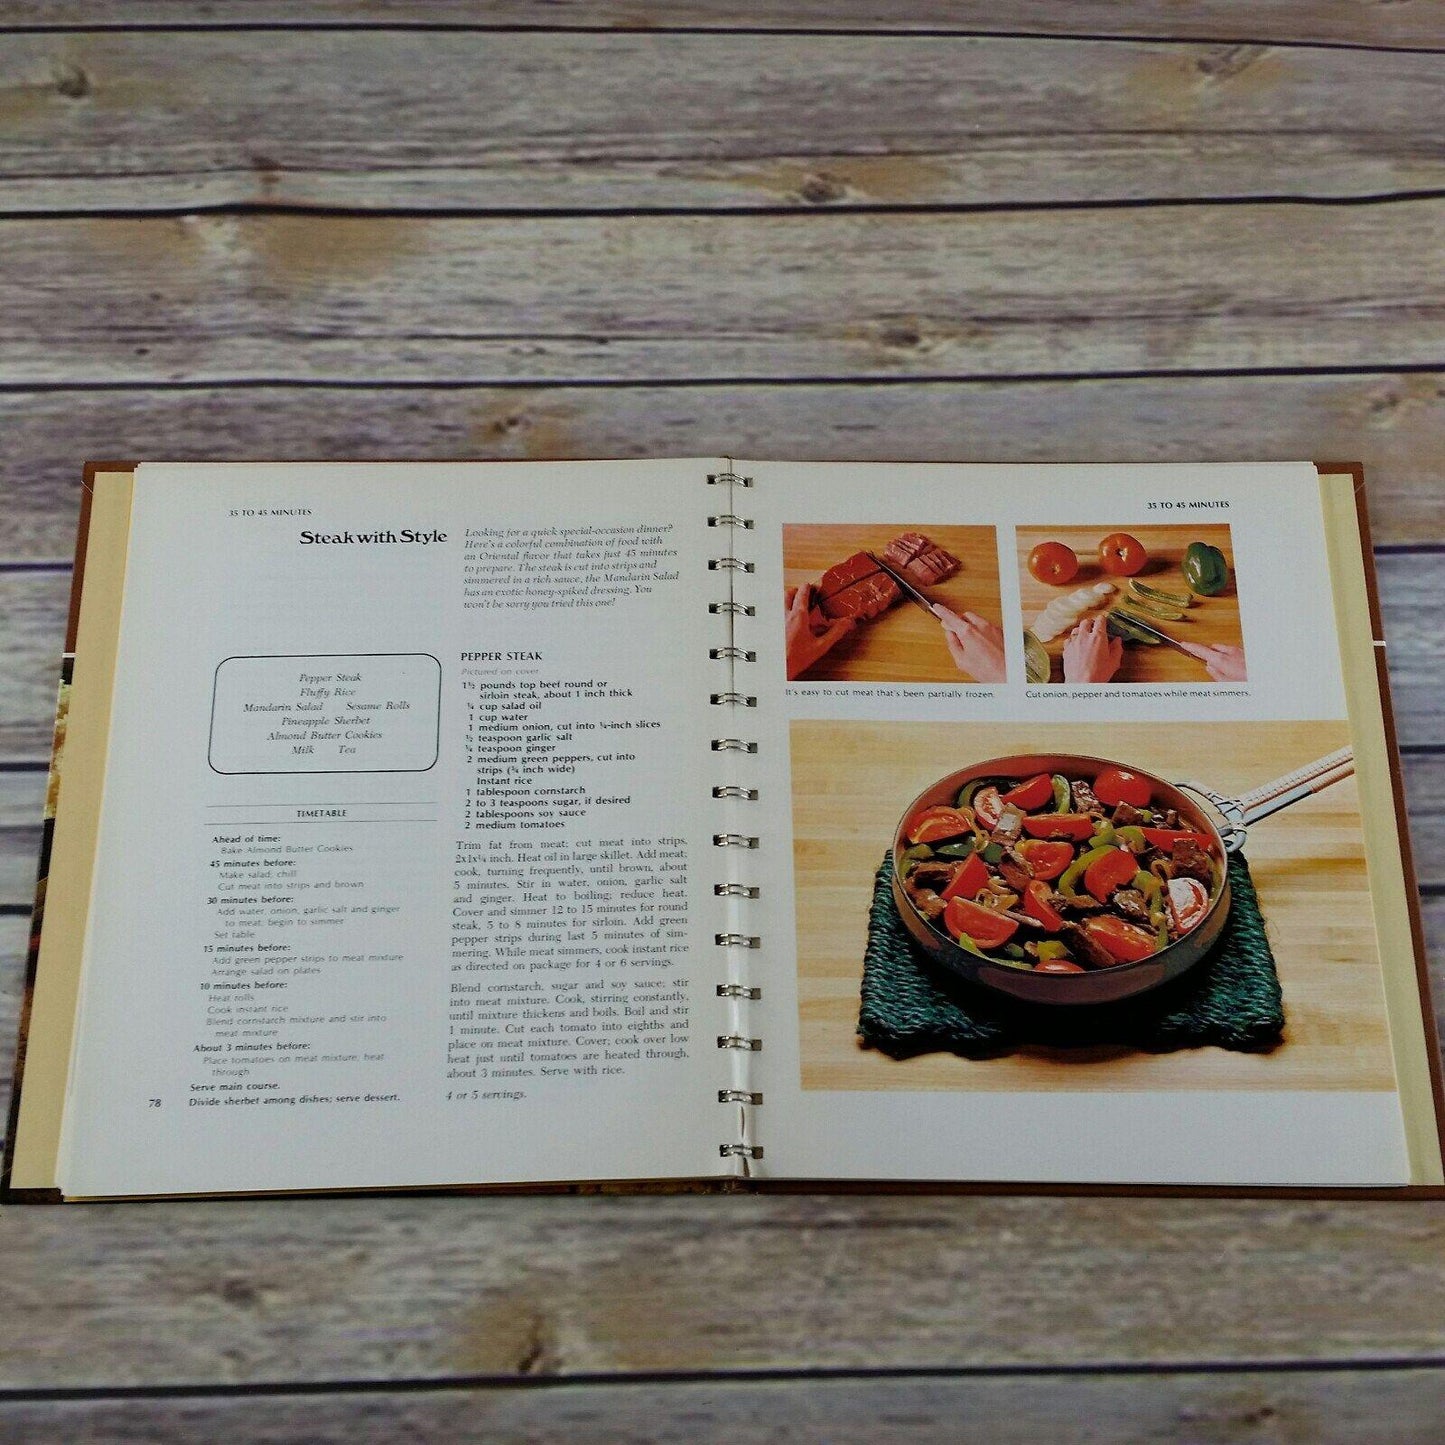 Vintage Cookbook Betty Crocker Family Dinners In A Hurry 1974 Hardcover Spiral Bound 6th Printing Meals in Minutes